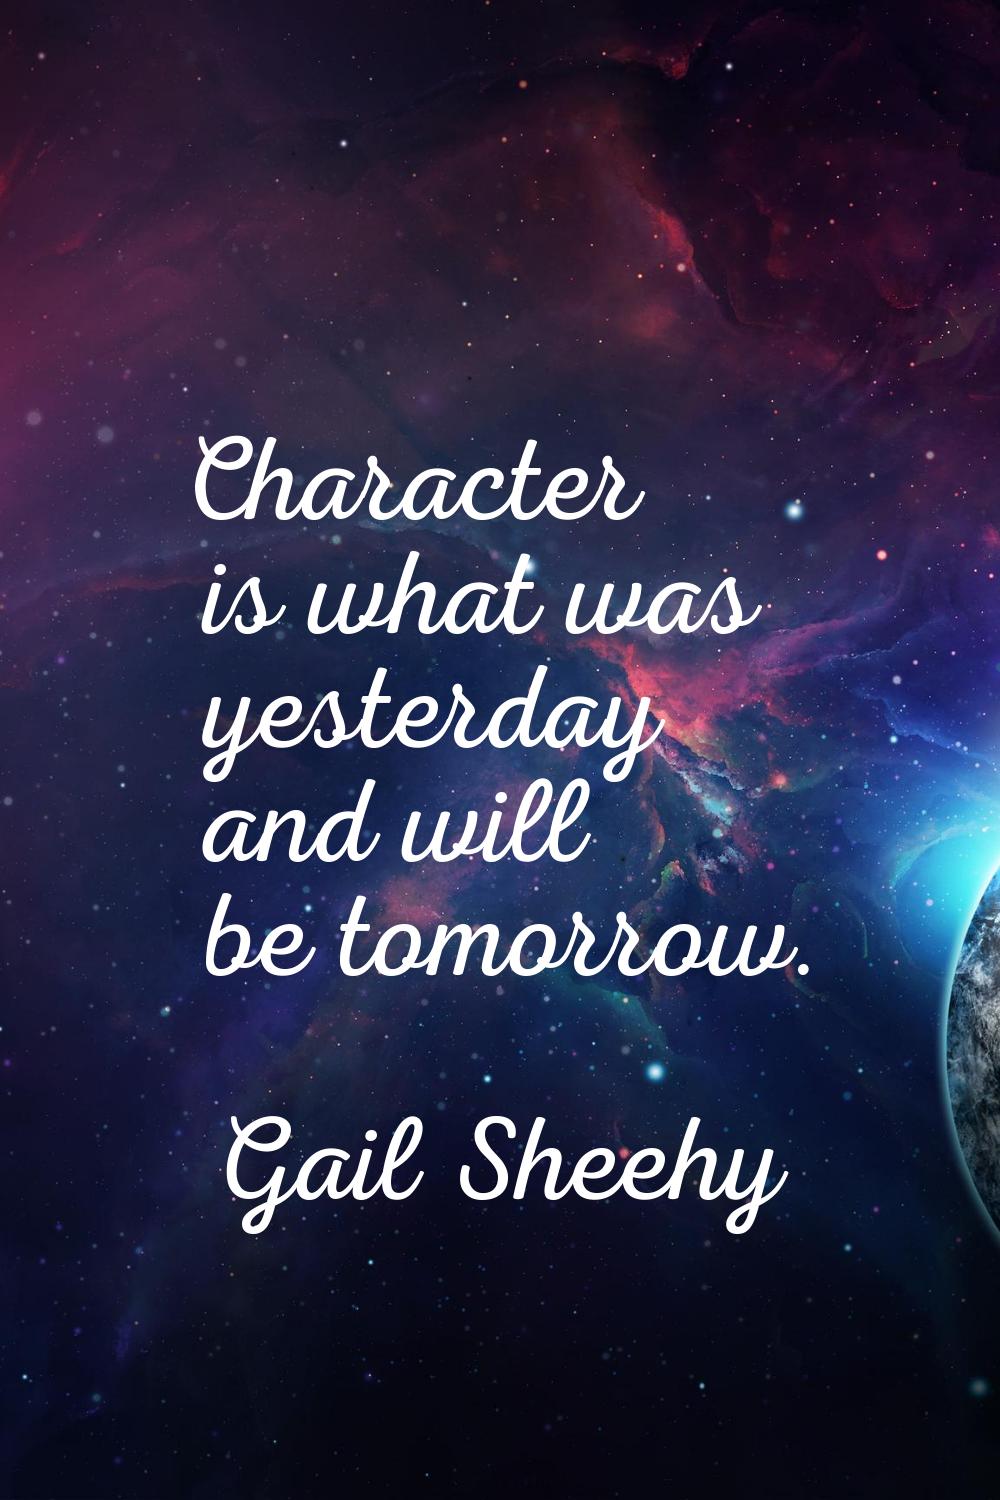 Character is what was yesterday and will be tomorrow.